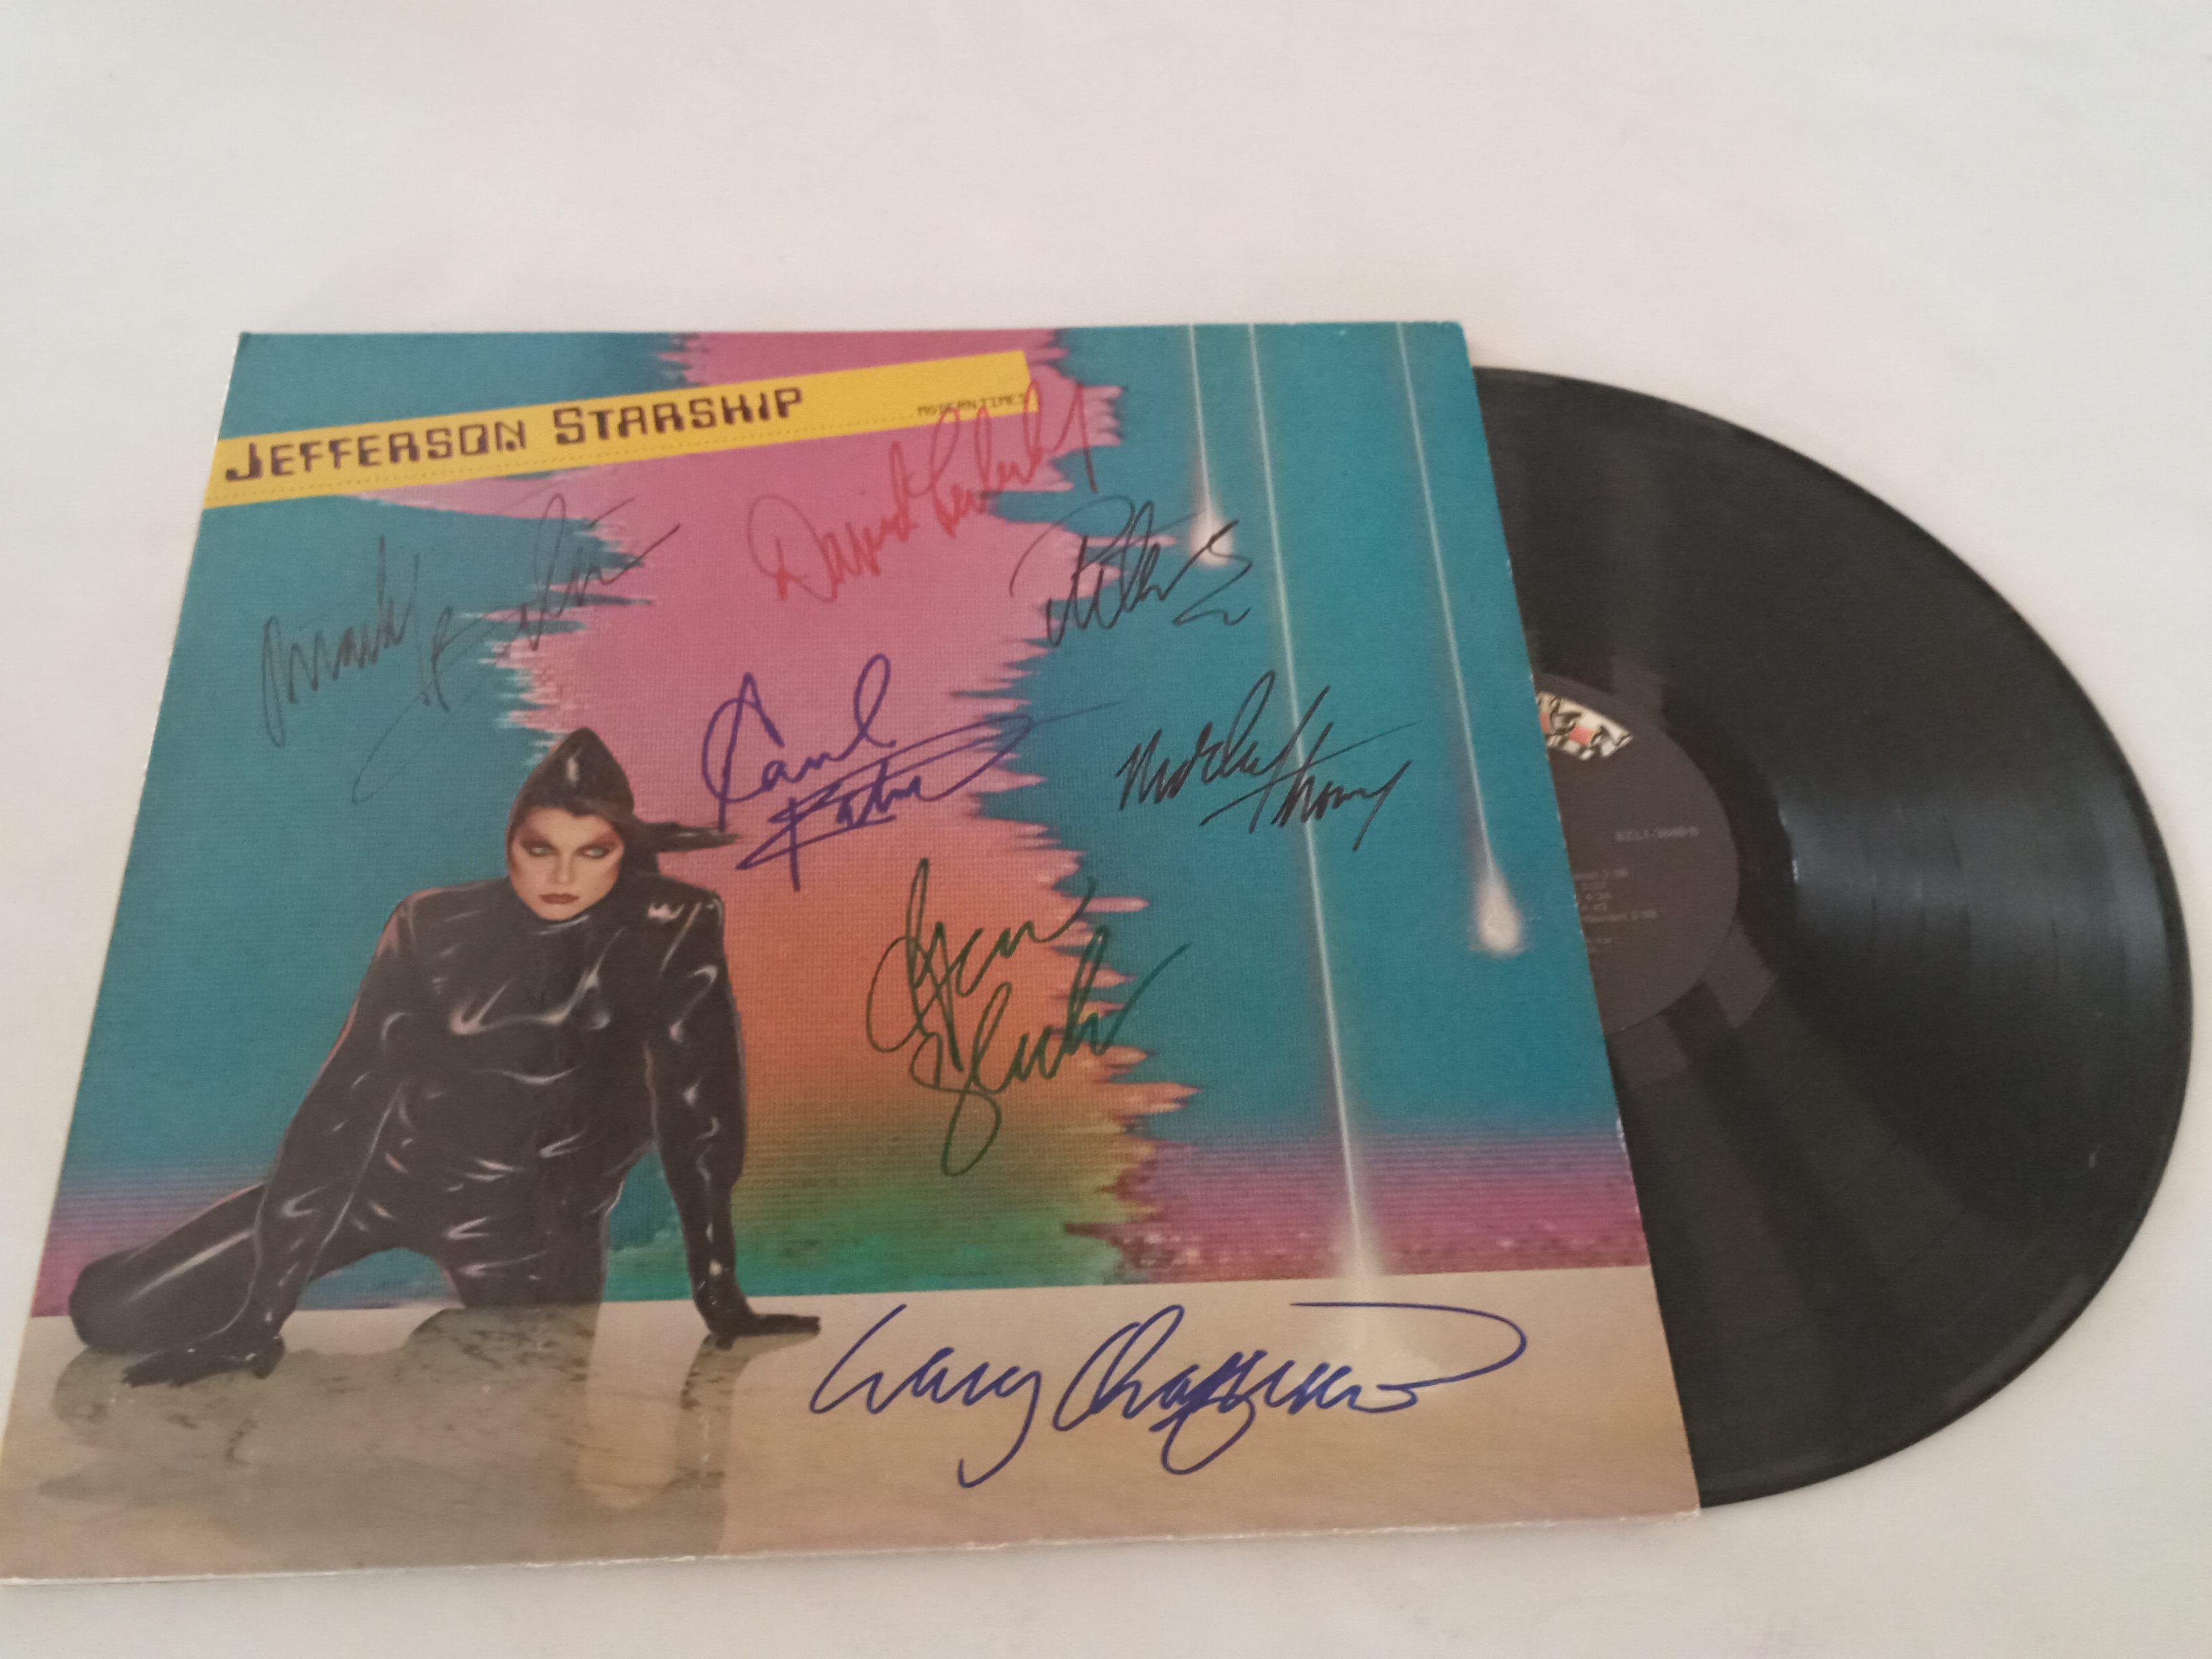 Grace Slick, Paul Kantor, Mickey Thomas, Jefferson Starship band signed LP "Modern Times" with proof